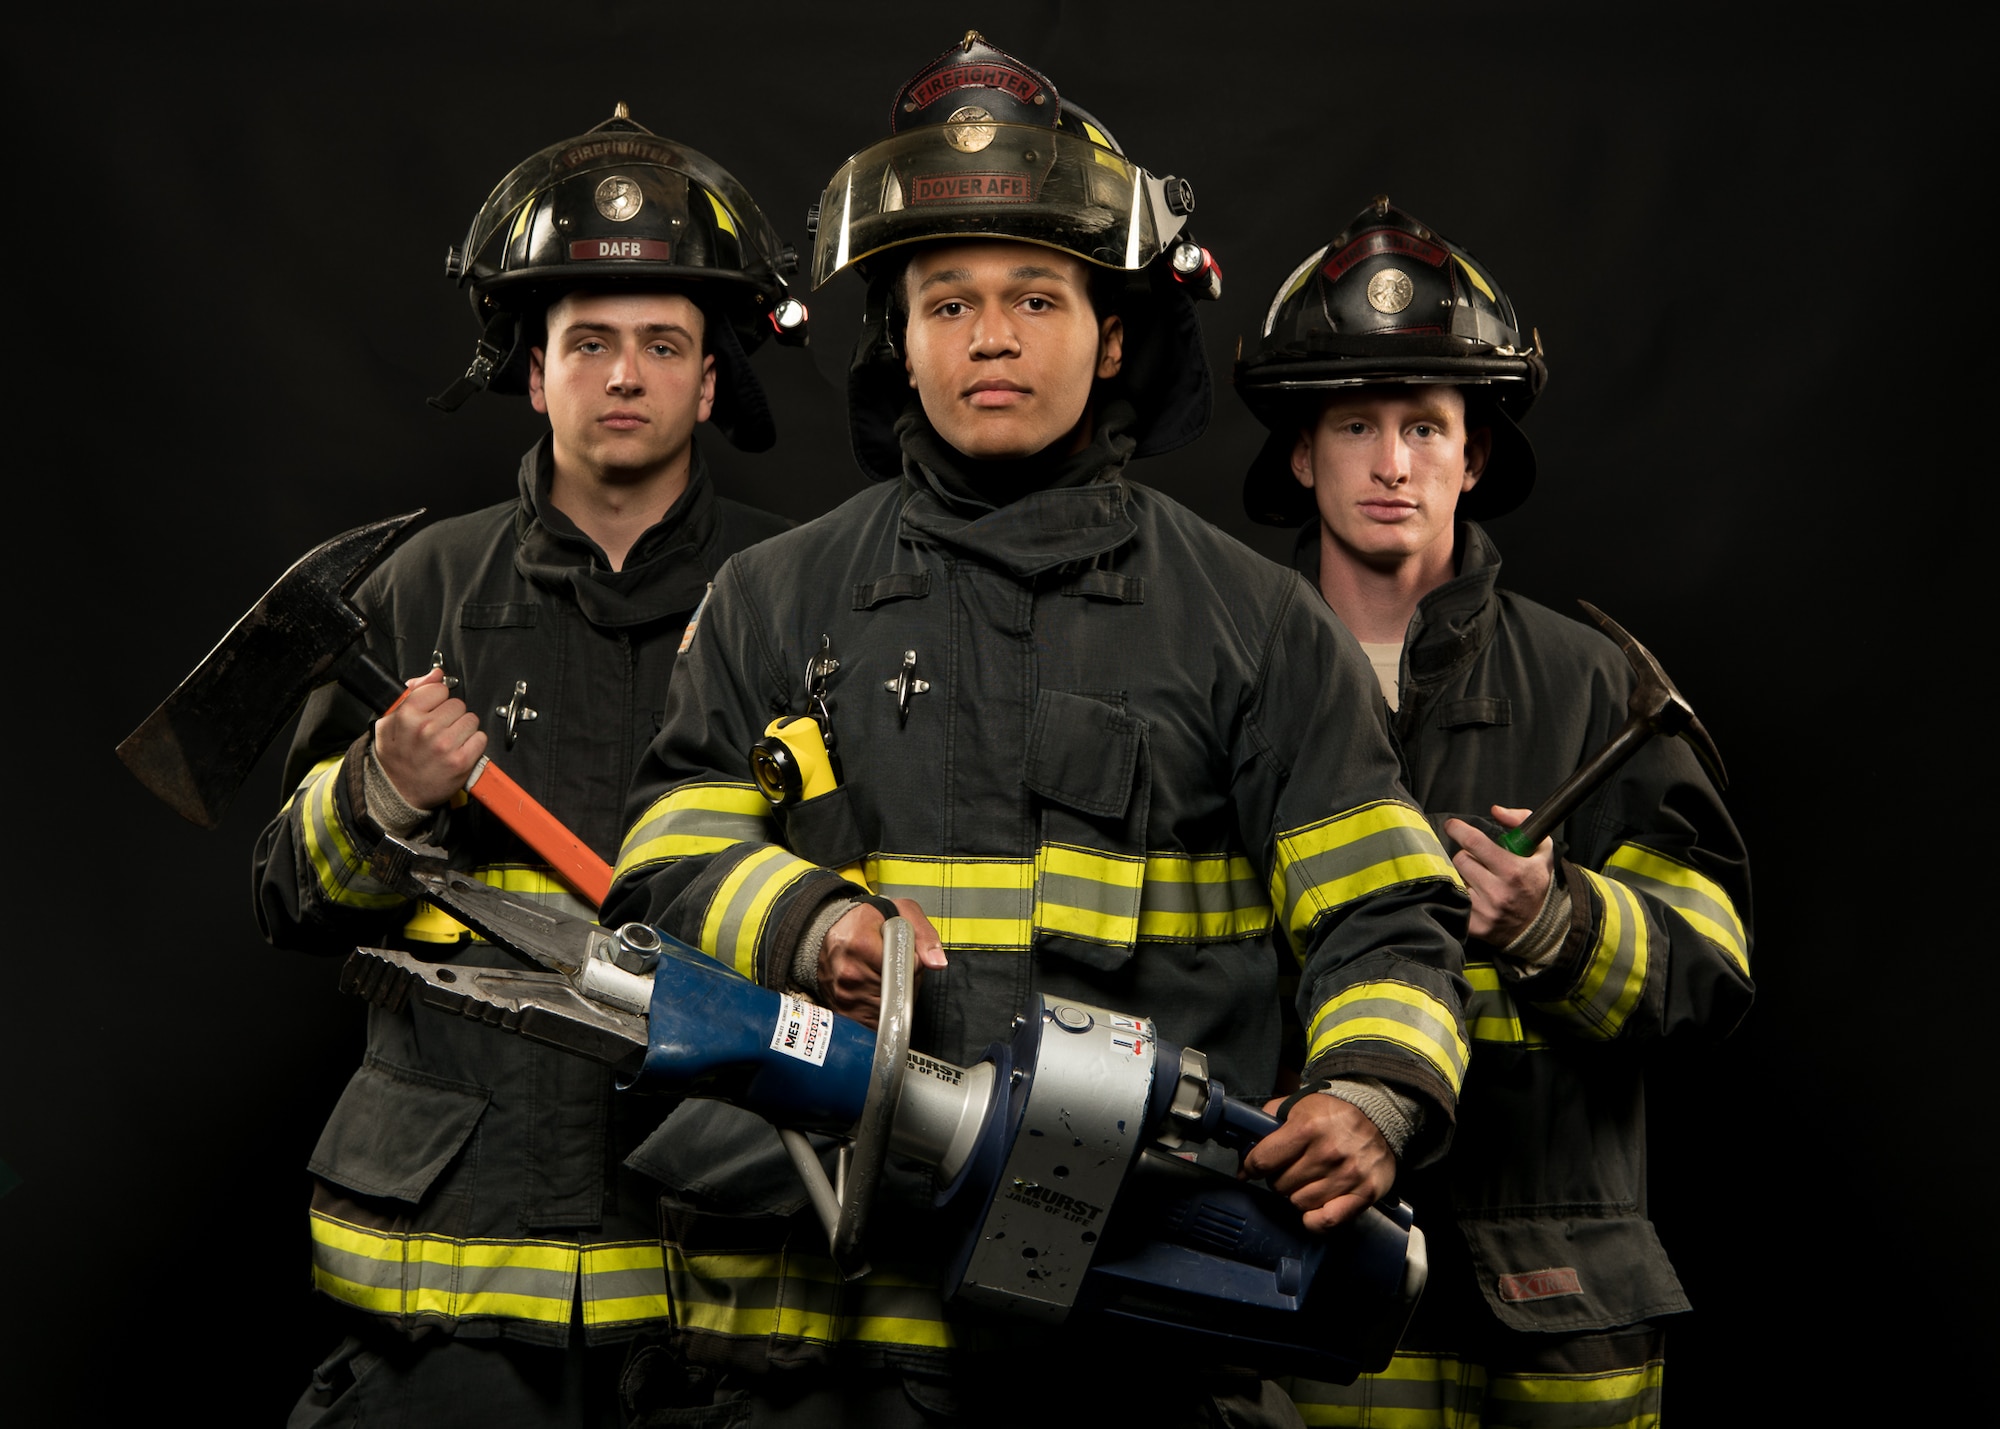 Senior Airman Andrew Frost, Airman 1st Class Dylan Dykes and Senior Airman Patrick Erwin, all 436th Civil Engineer Squadron driver operators, wear their personal protection equipment in honor of Fire Prevention Week Oct. 1, 2019, at Dover Air Force Base, Del. Fire Prevention Week is observed each year in commemoration of the Great Chicago Fire, which began Oct. 8, 1871, and destroyed 2,000 acres of land. (U.S. Air Force photo by Mauricio Campino)